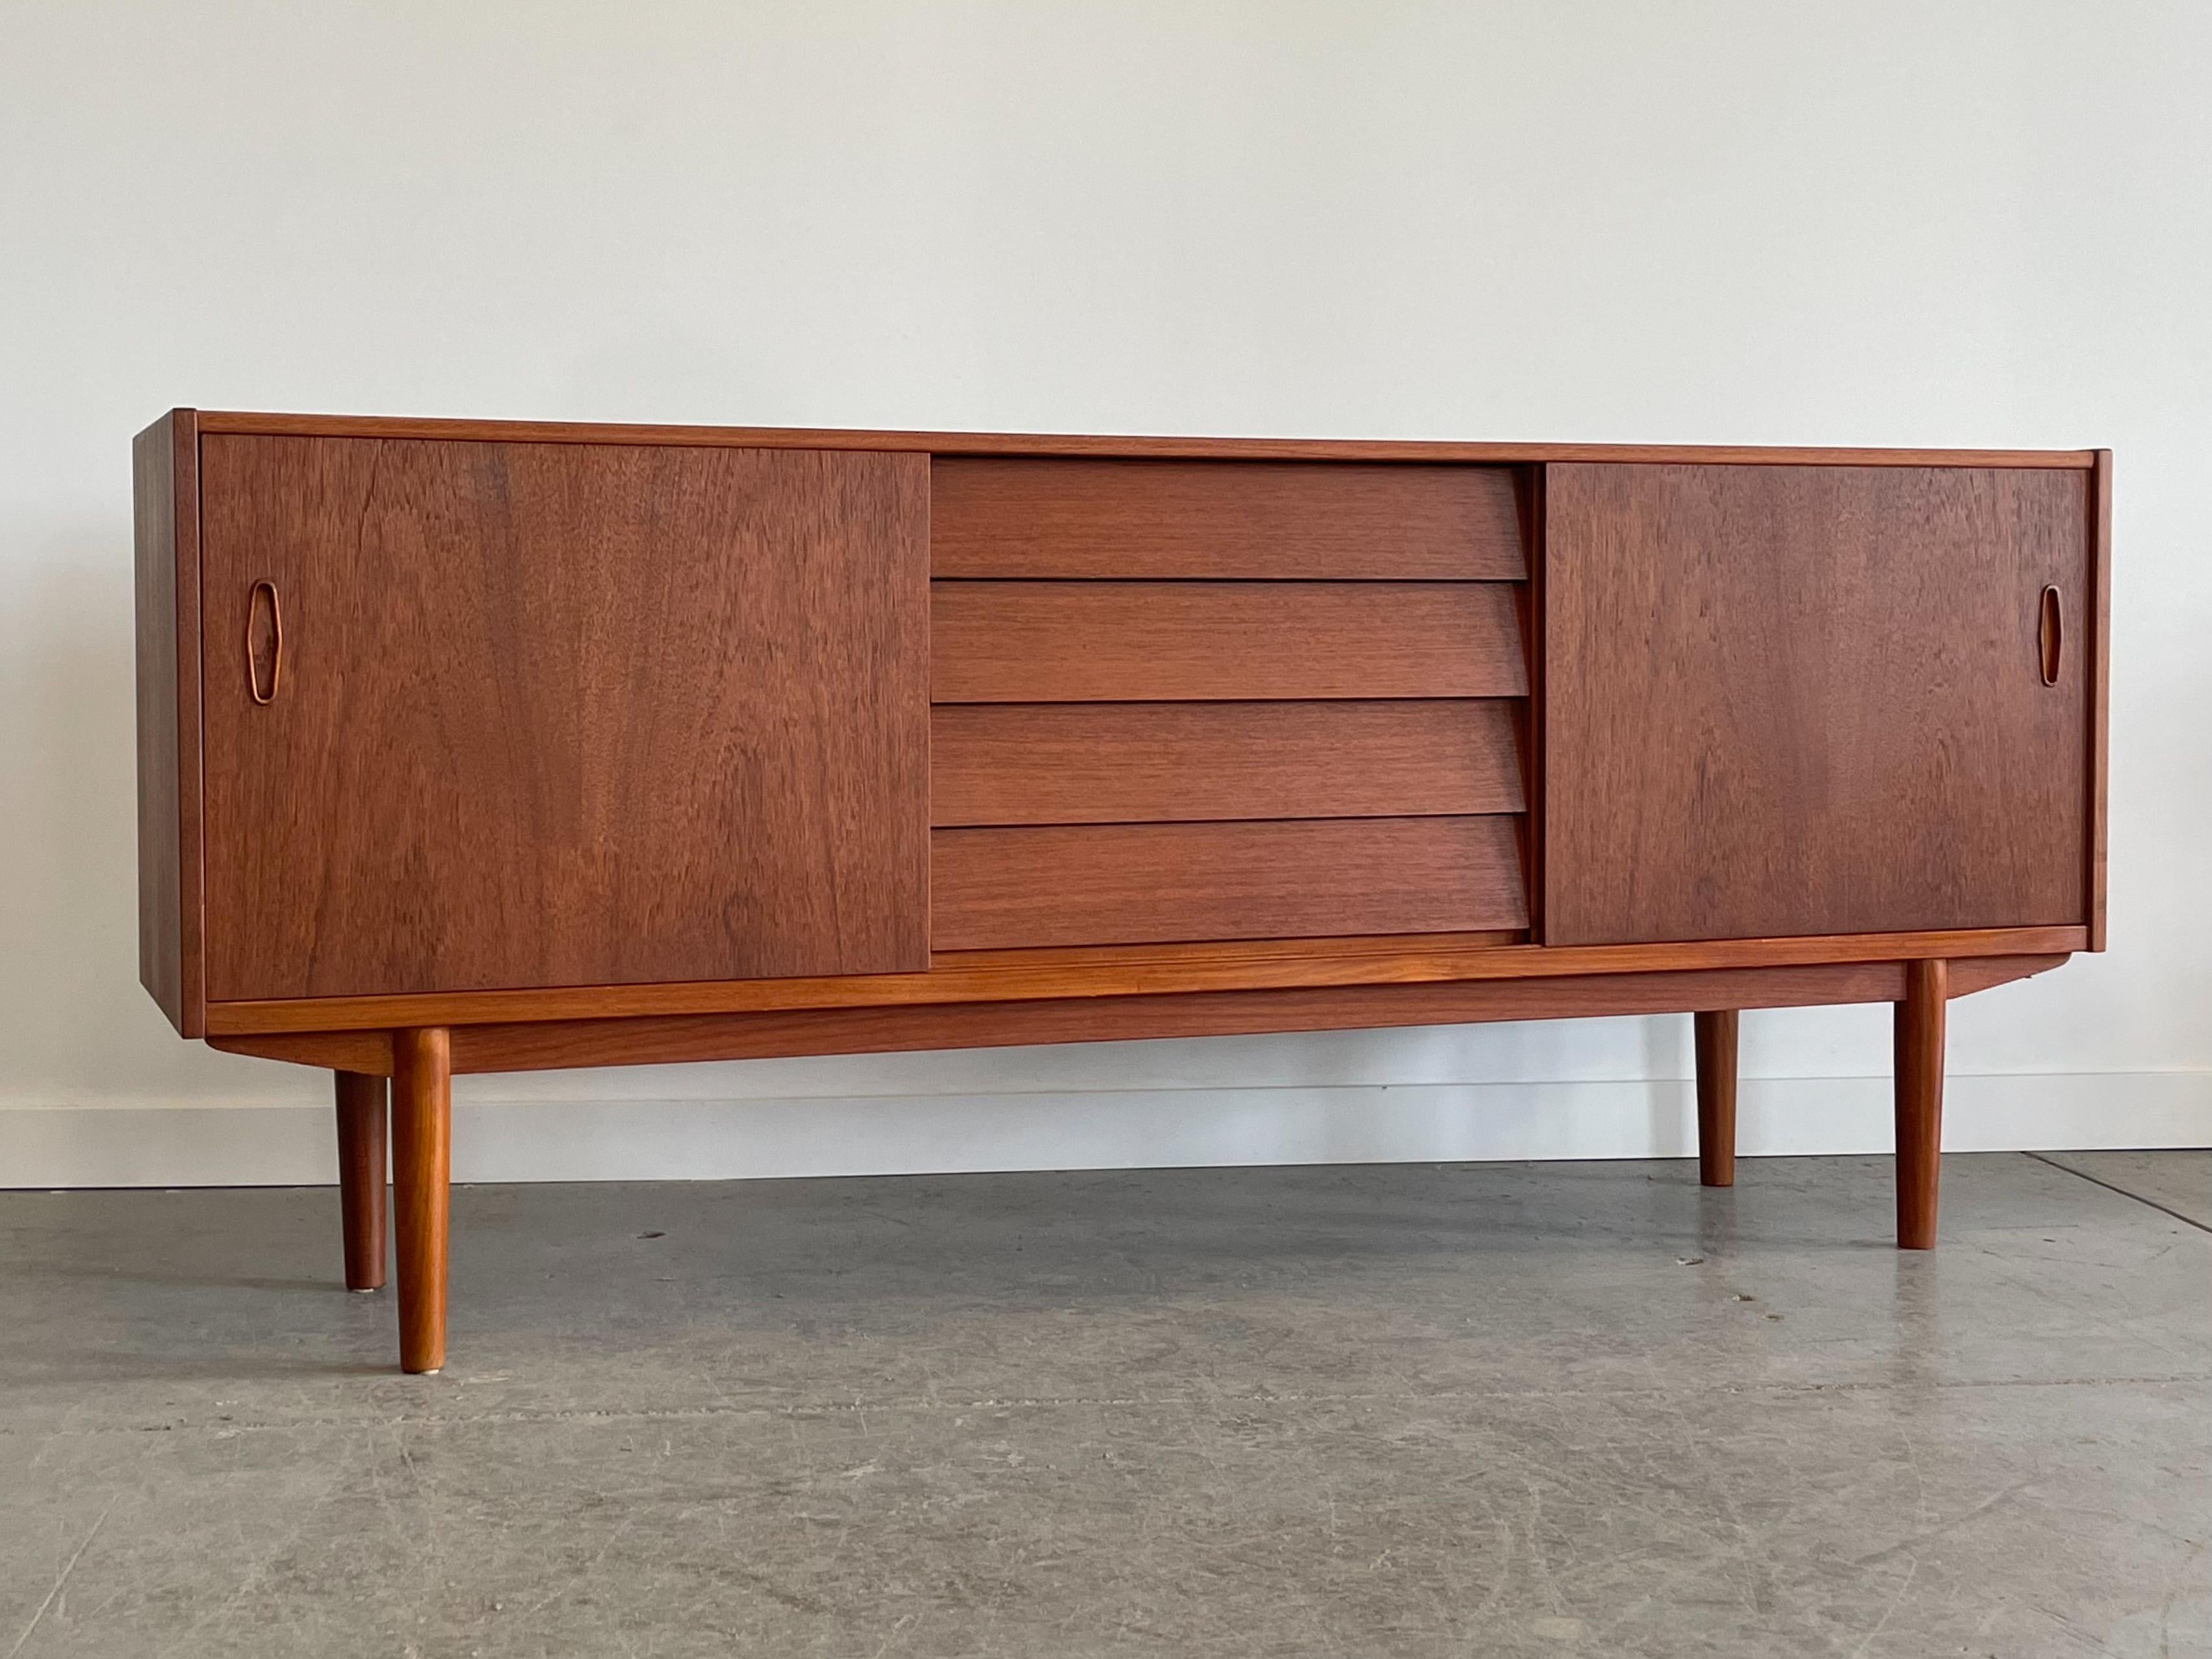 Teak ‘Trio’ credenza designed by Nils Jonsson for Troeds, Sweden. This piece features a combination drawer and adjustable shelf storage. The drawers are constructed from solid maple with box joinery and there is a felt-lined cutlery tray. The drawer